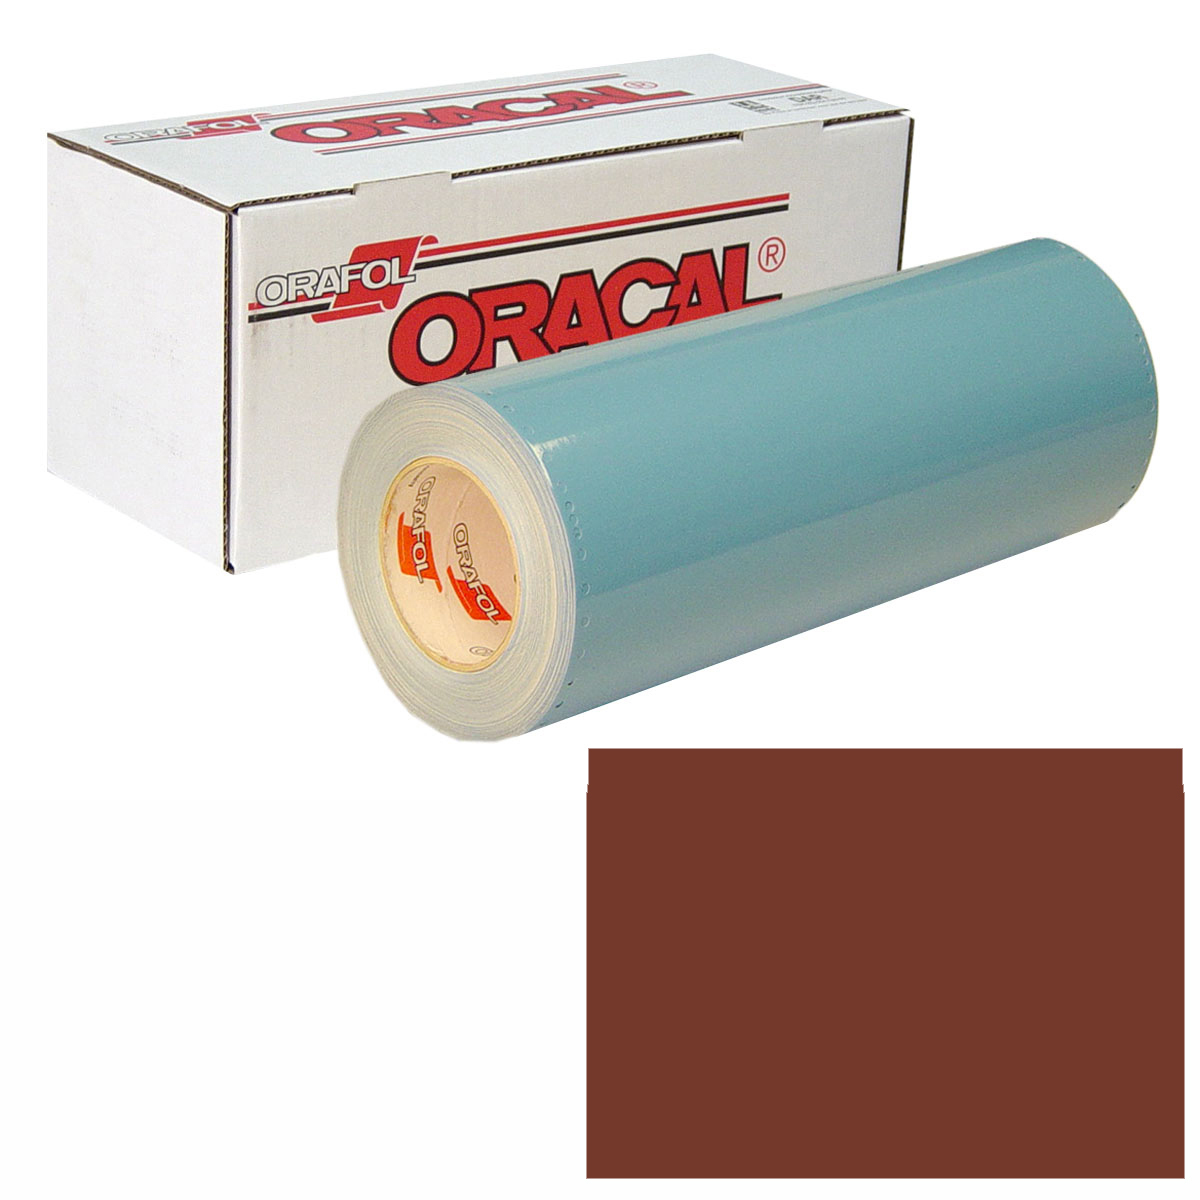 ORACAL 751 30in X 50yd 079 Red Brown